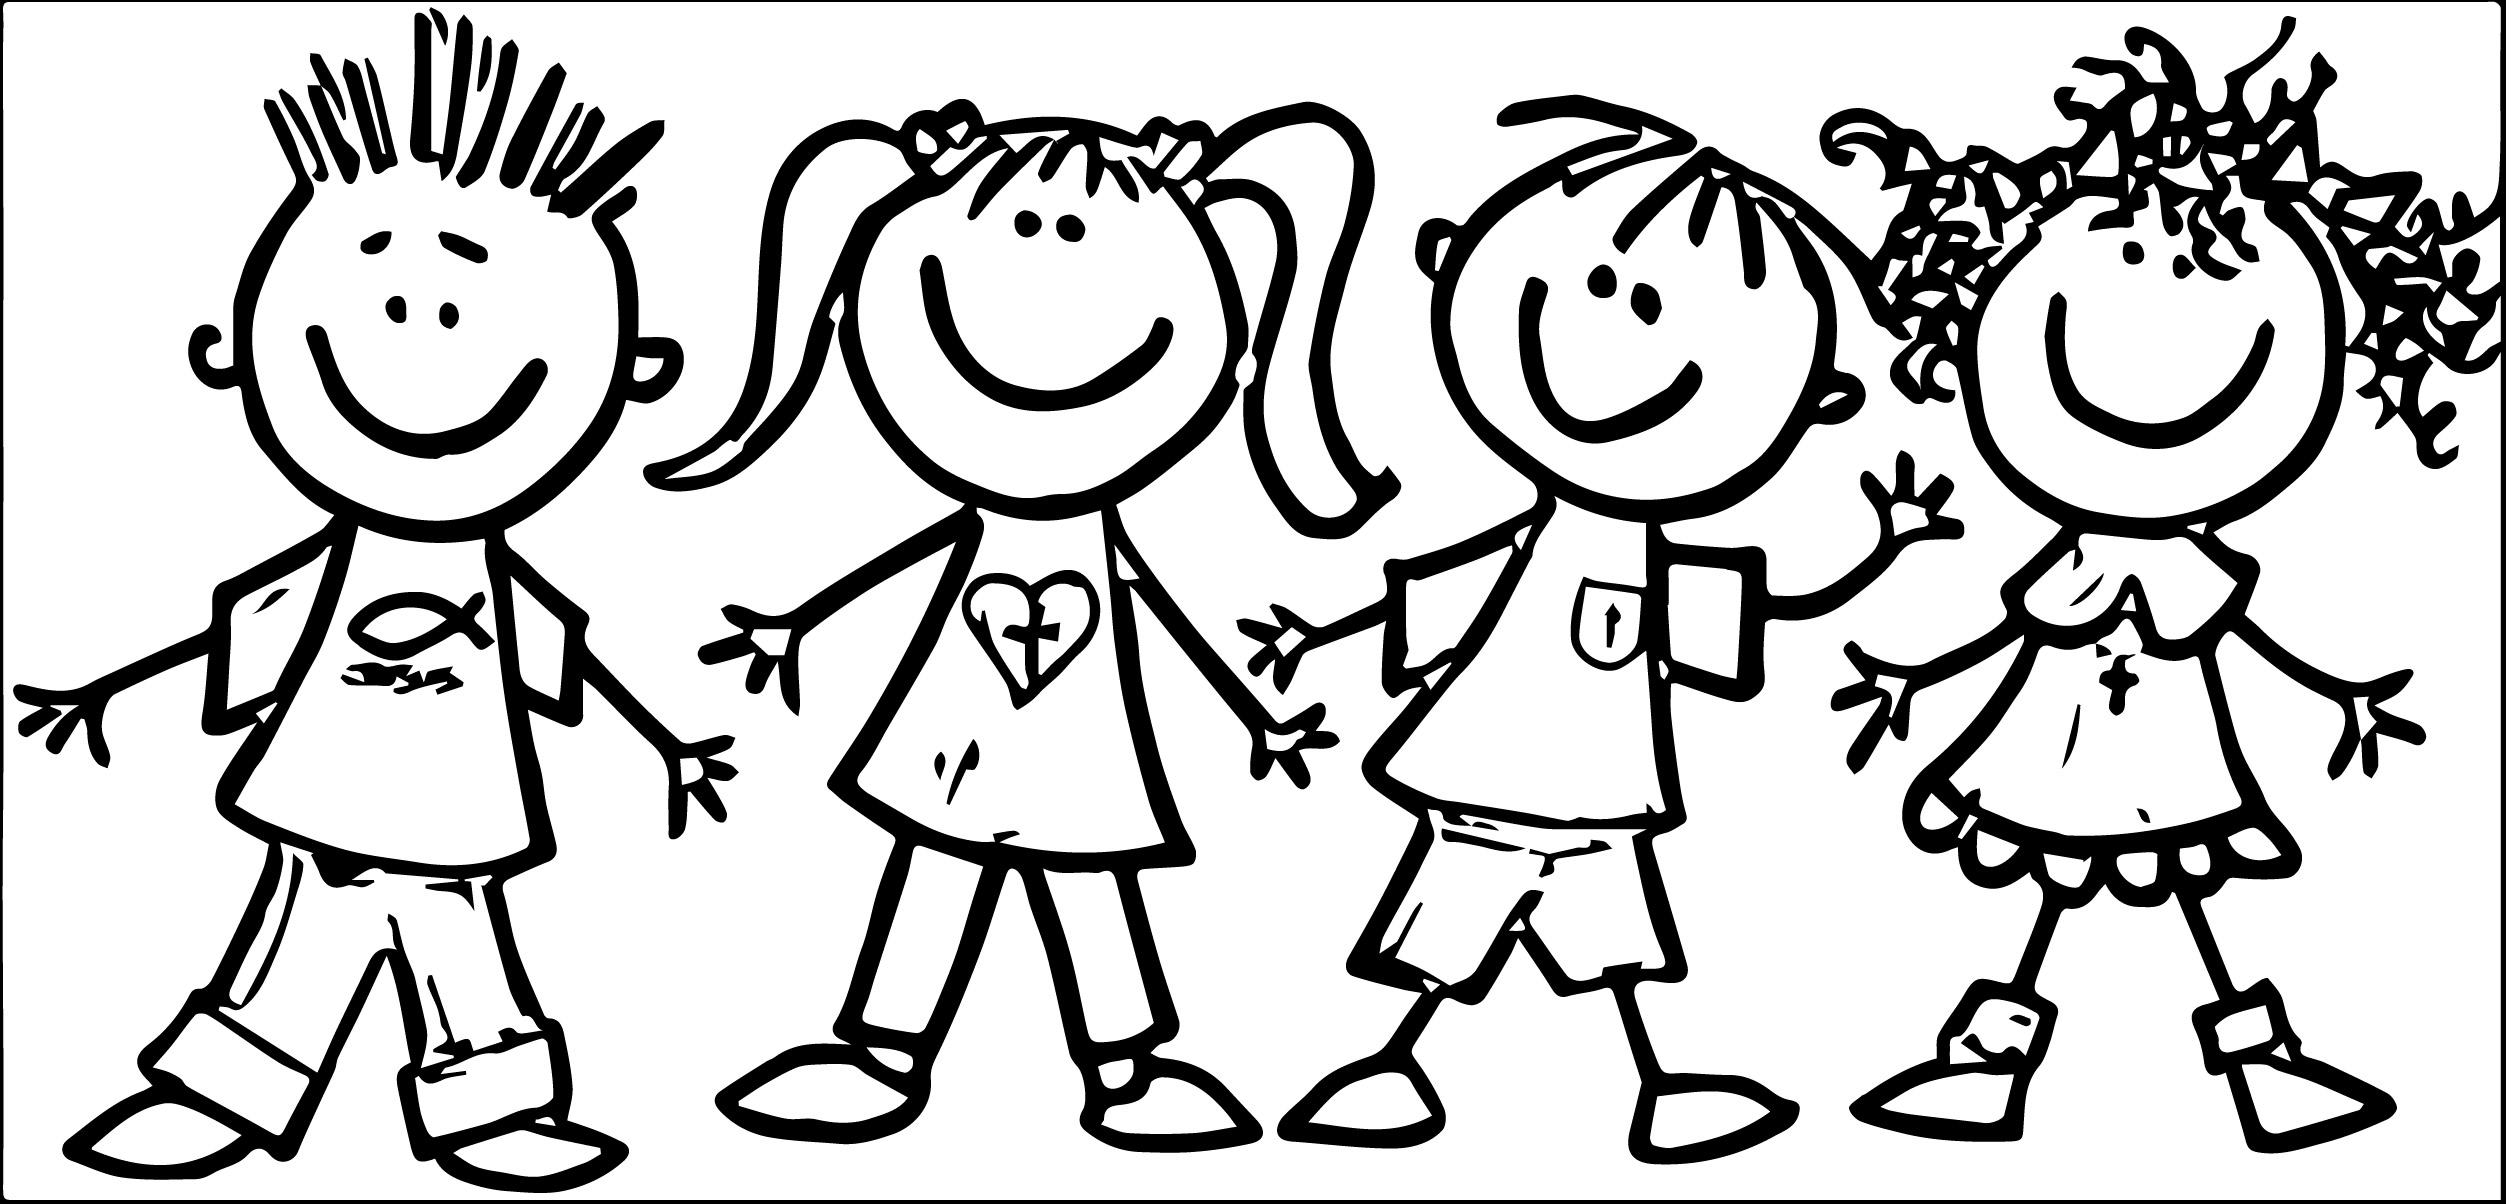 Friends clipart black and white Inspirational Group of